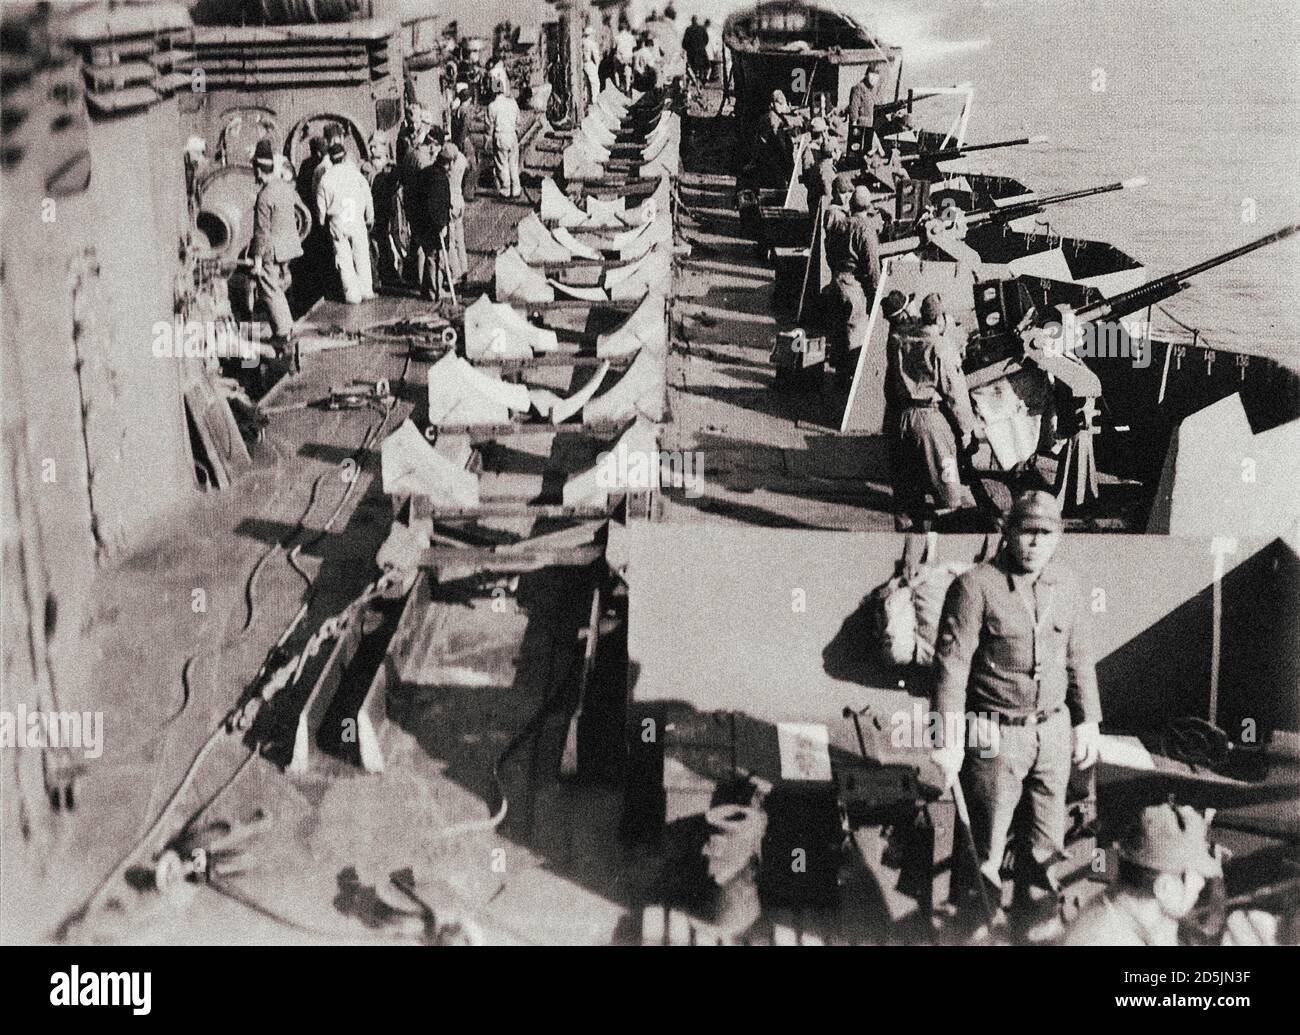 View of the upper deck of the Japanese light cruiser “Kitakami”. The photo shows equipment for the transportation of manned torpedoes “Kaiten”. Kitaka Stock Photo